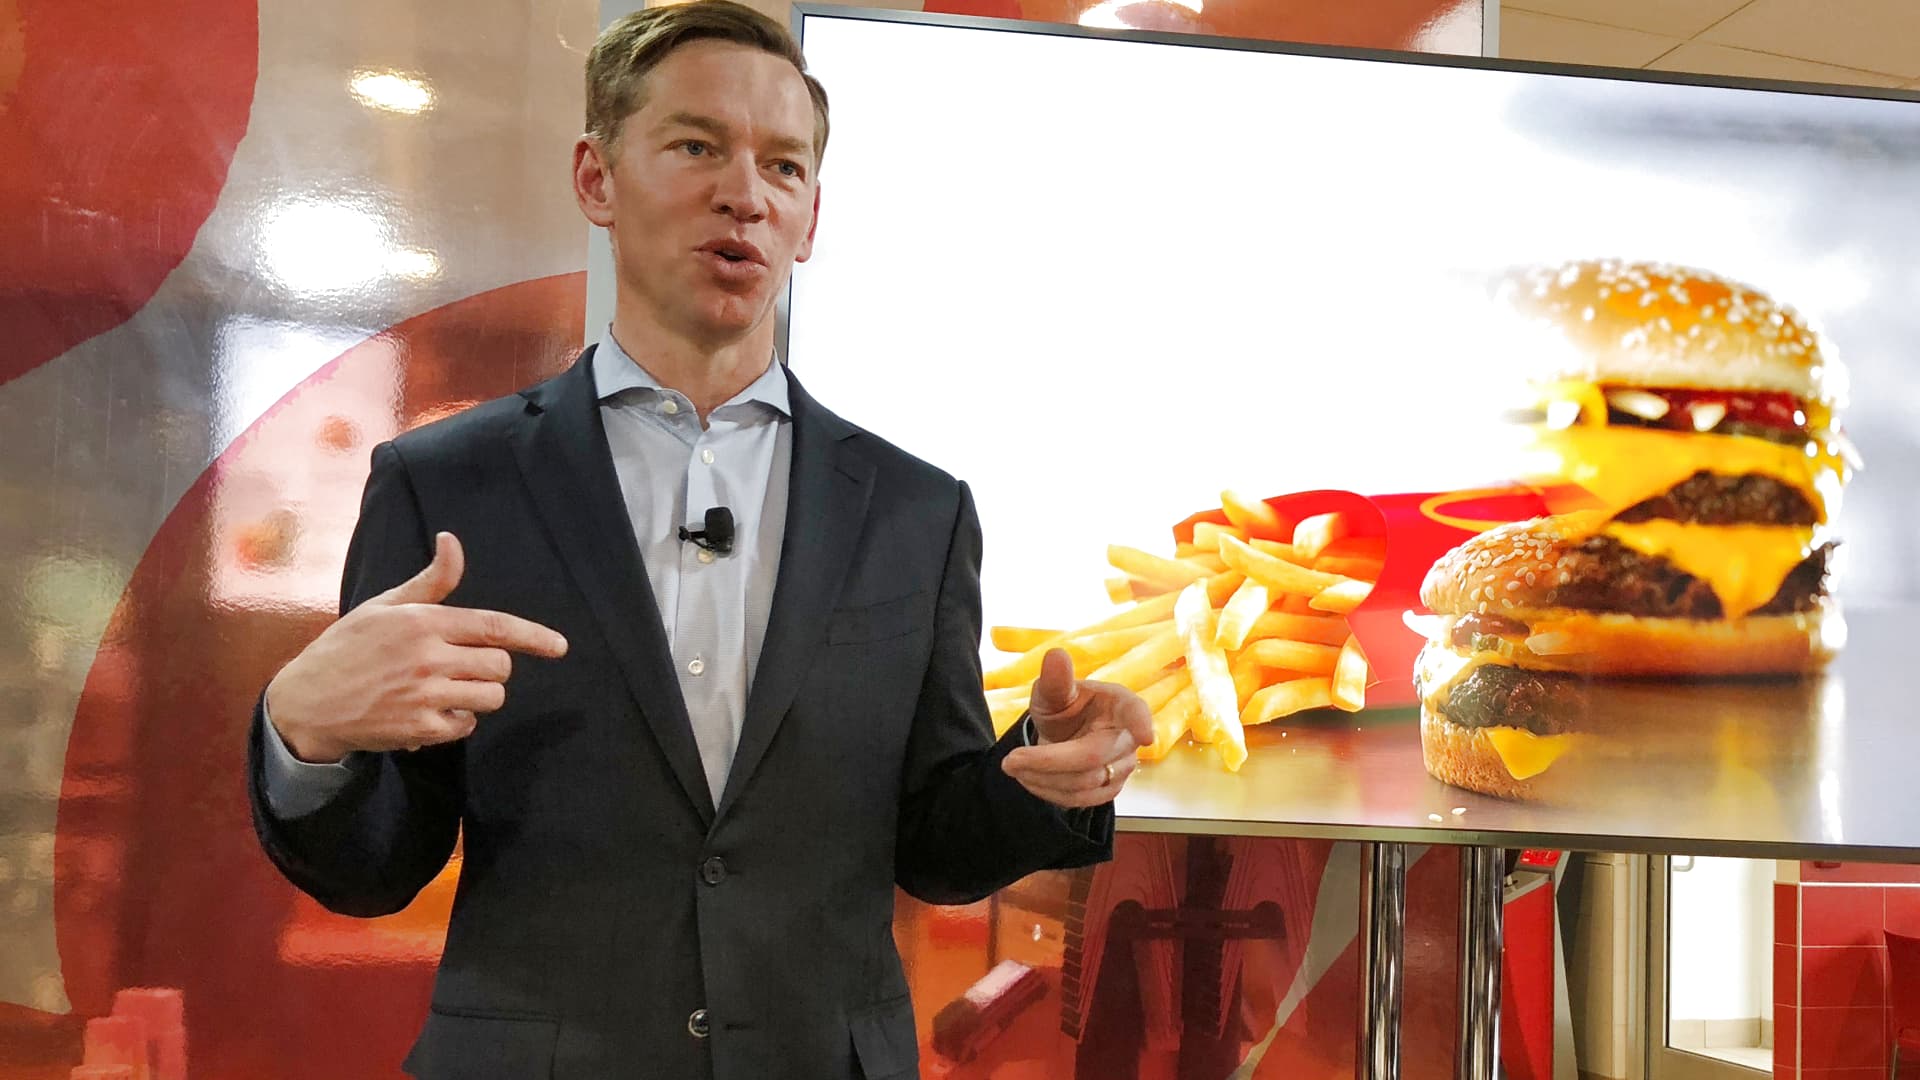 McDonald’s diners are pushing back against price increases in some markets, CEO says